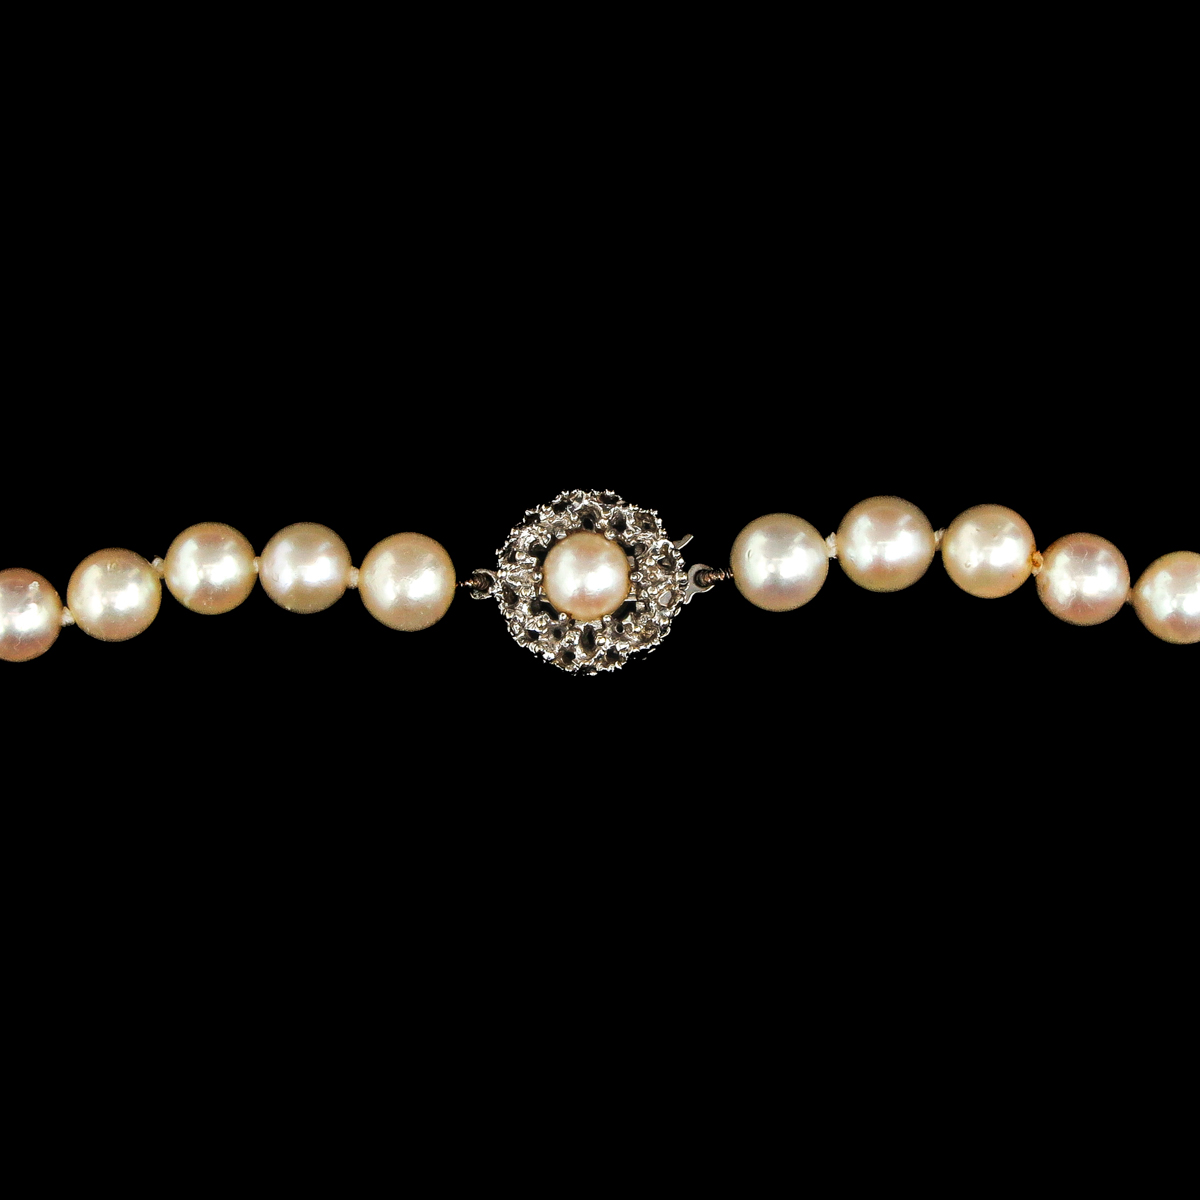 A Collection of 4 Pearl Necklaces - Image 6 of 10